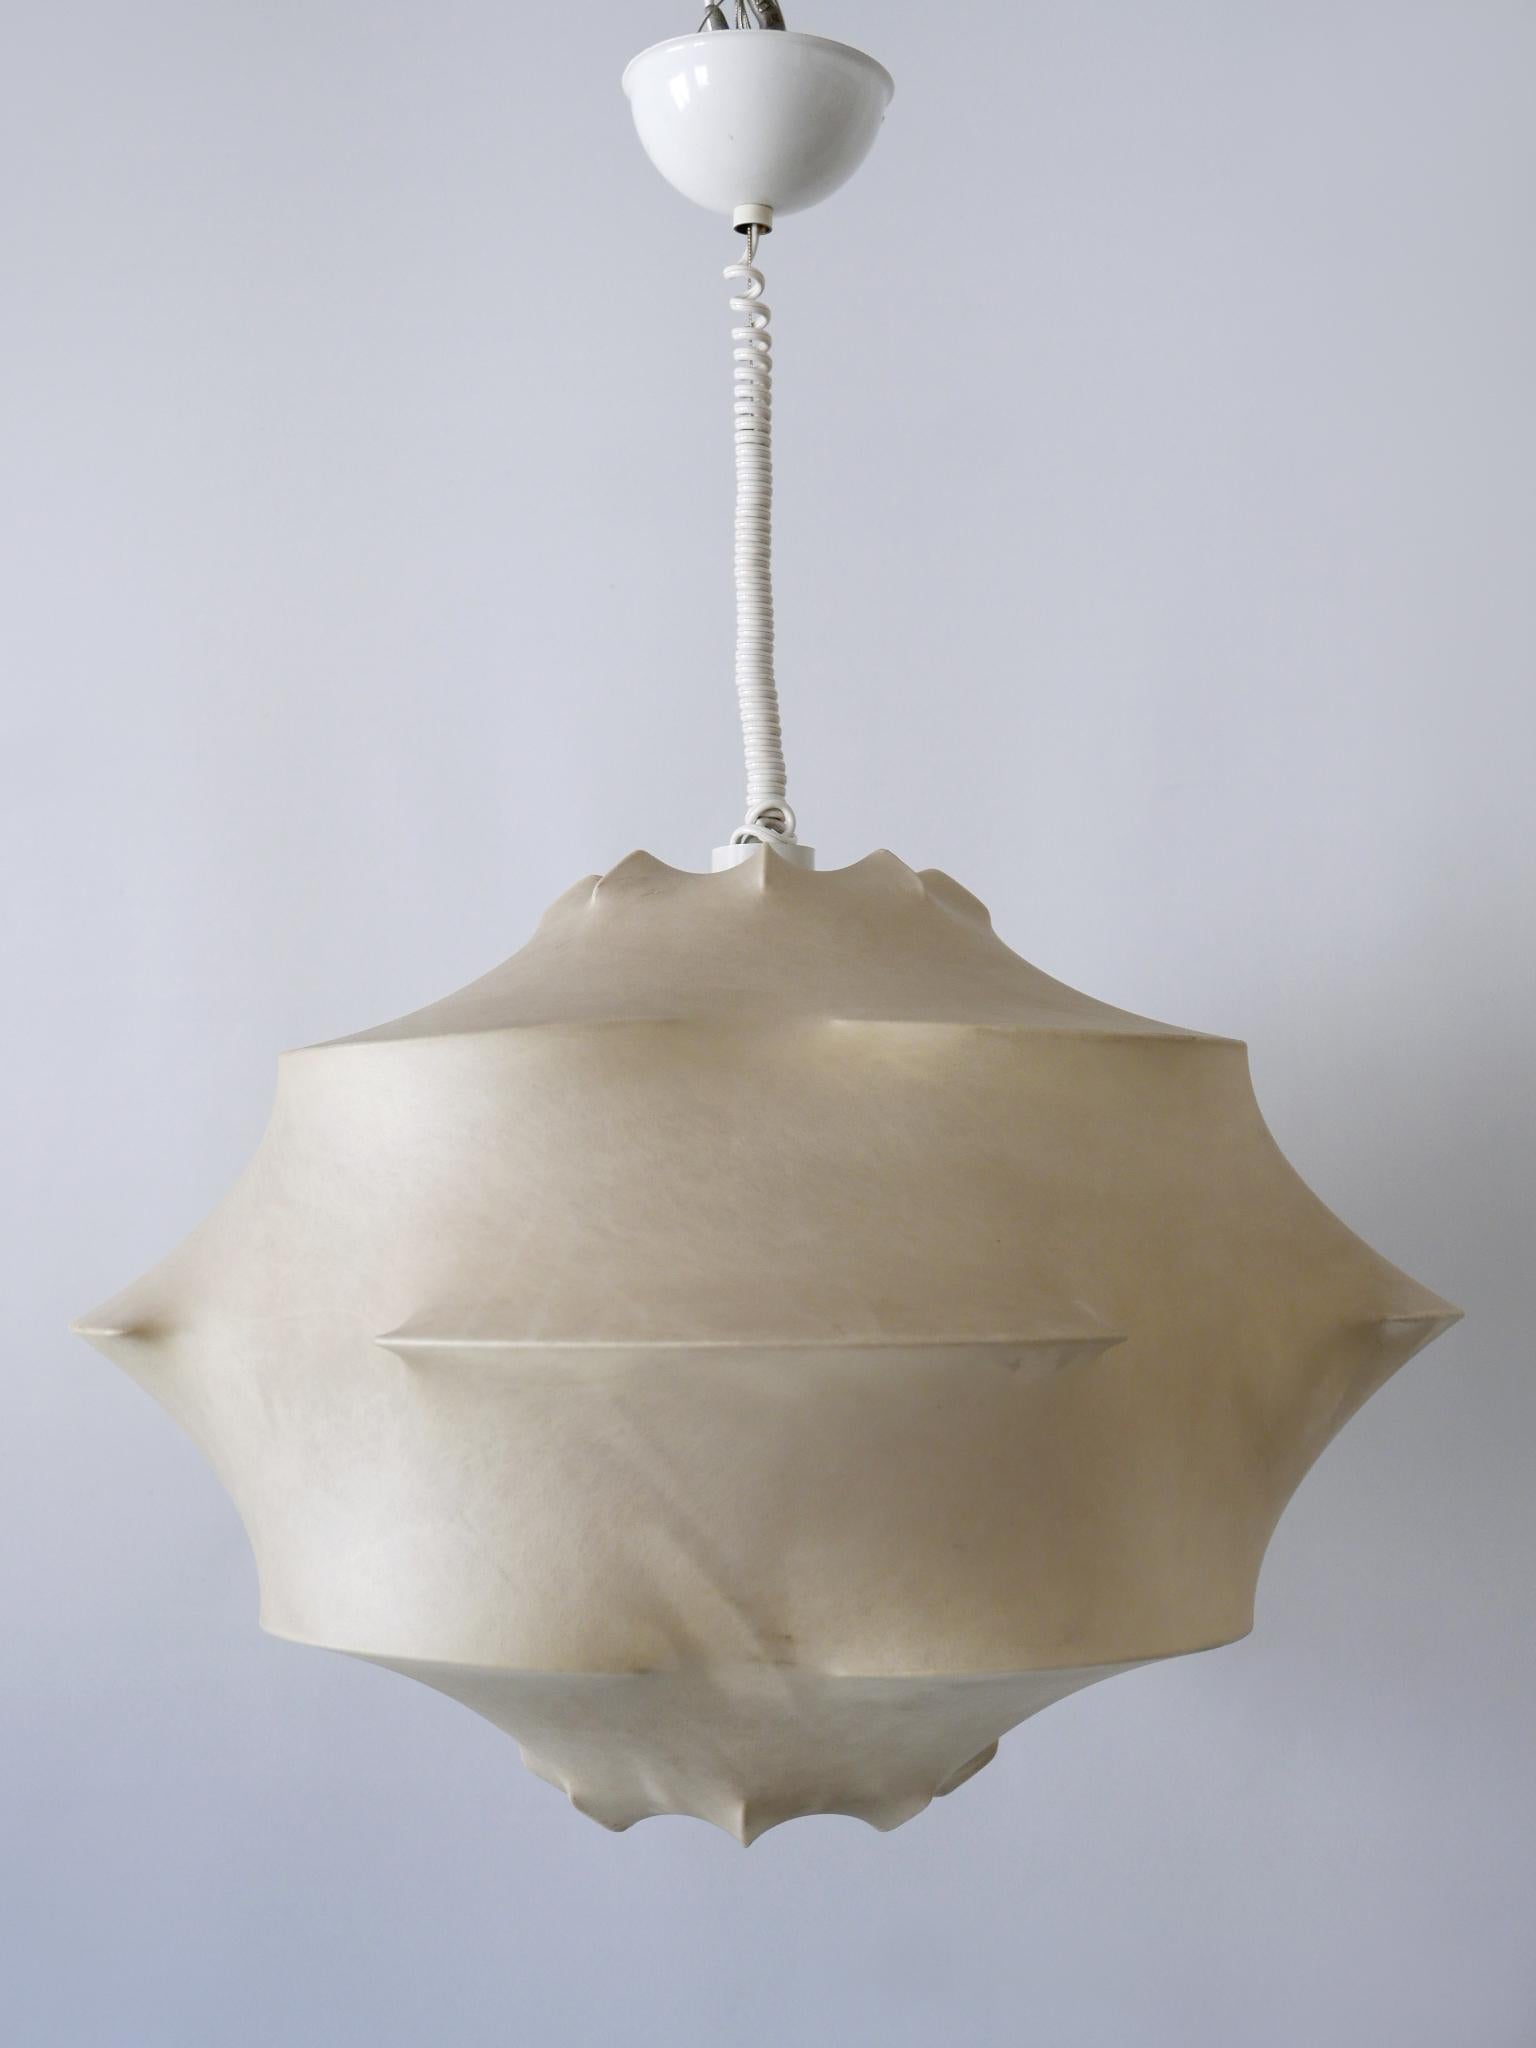 XL Mid-Century Modern Cocoon Pendant Lamp or Hanging Light by Flos Italy, 1960s For Sale 2